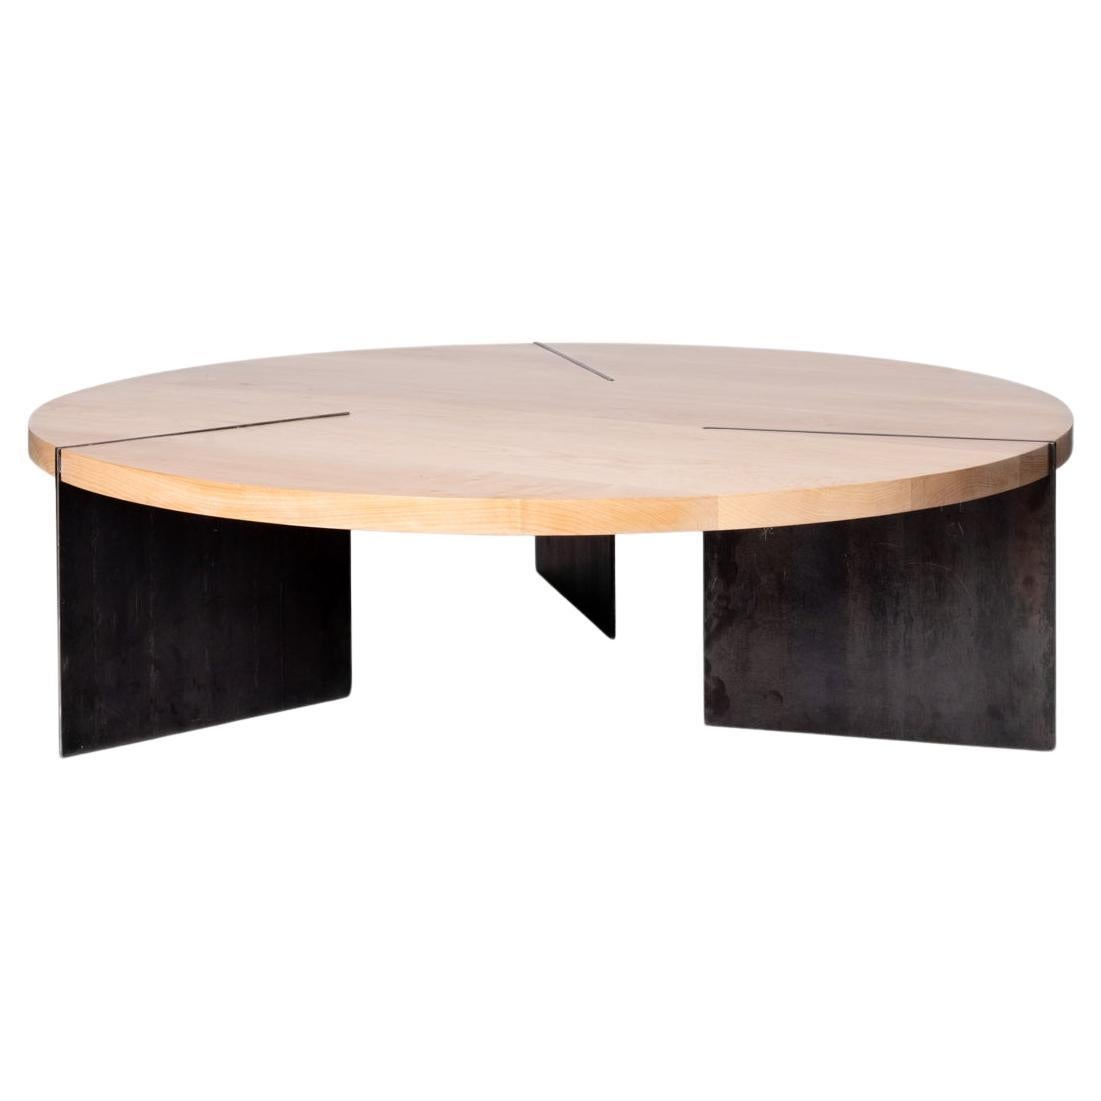 Reina Round Coffee Table in Maple Wood and Steel by Autonomous Furniture